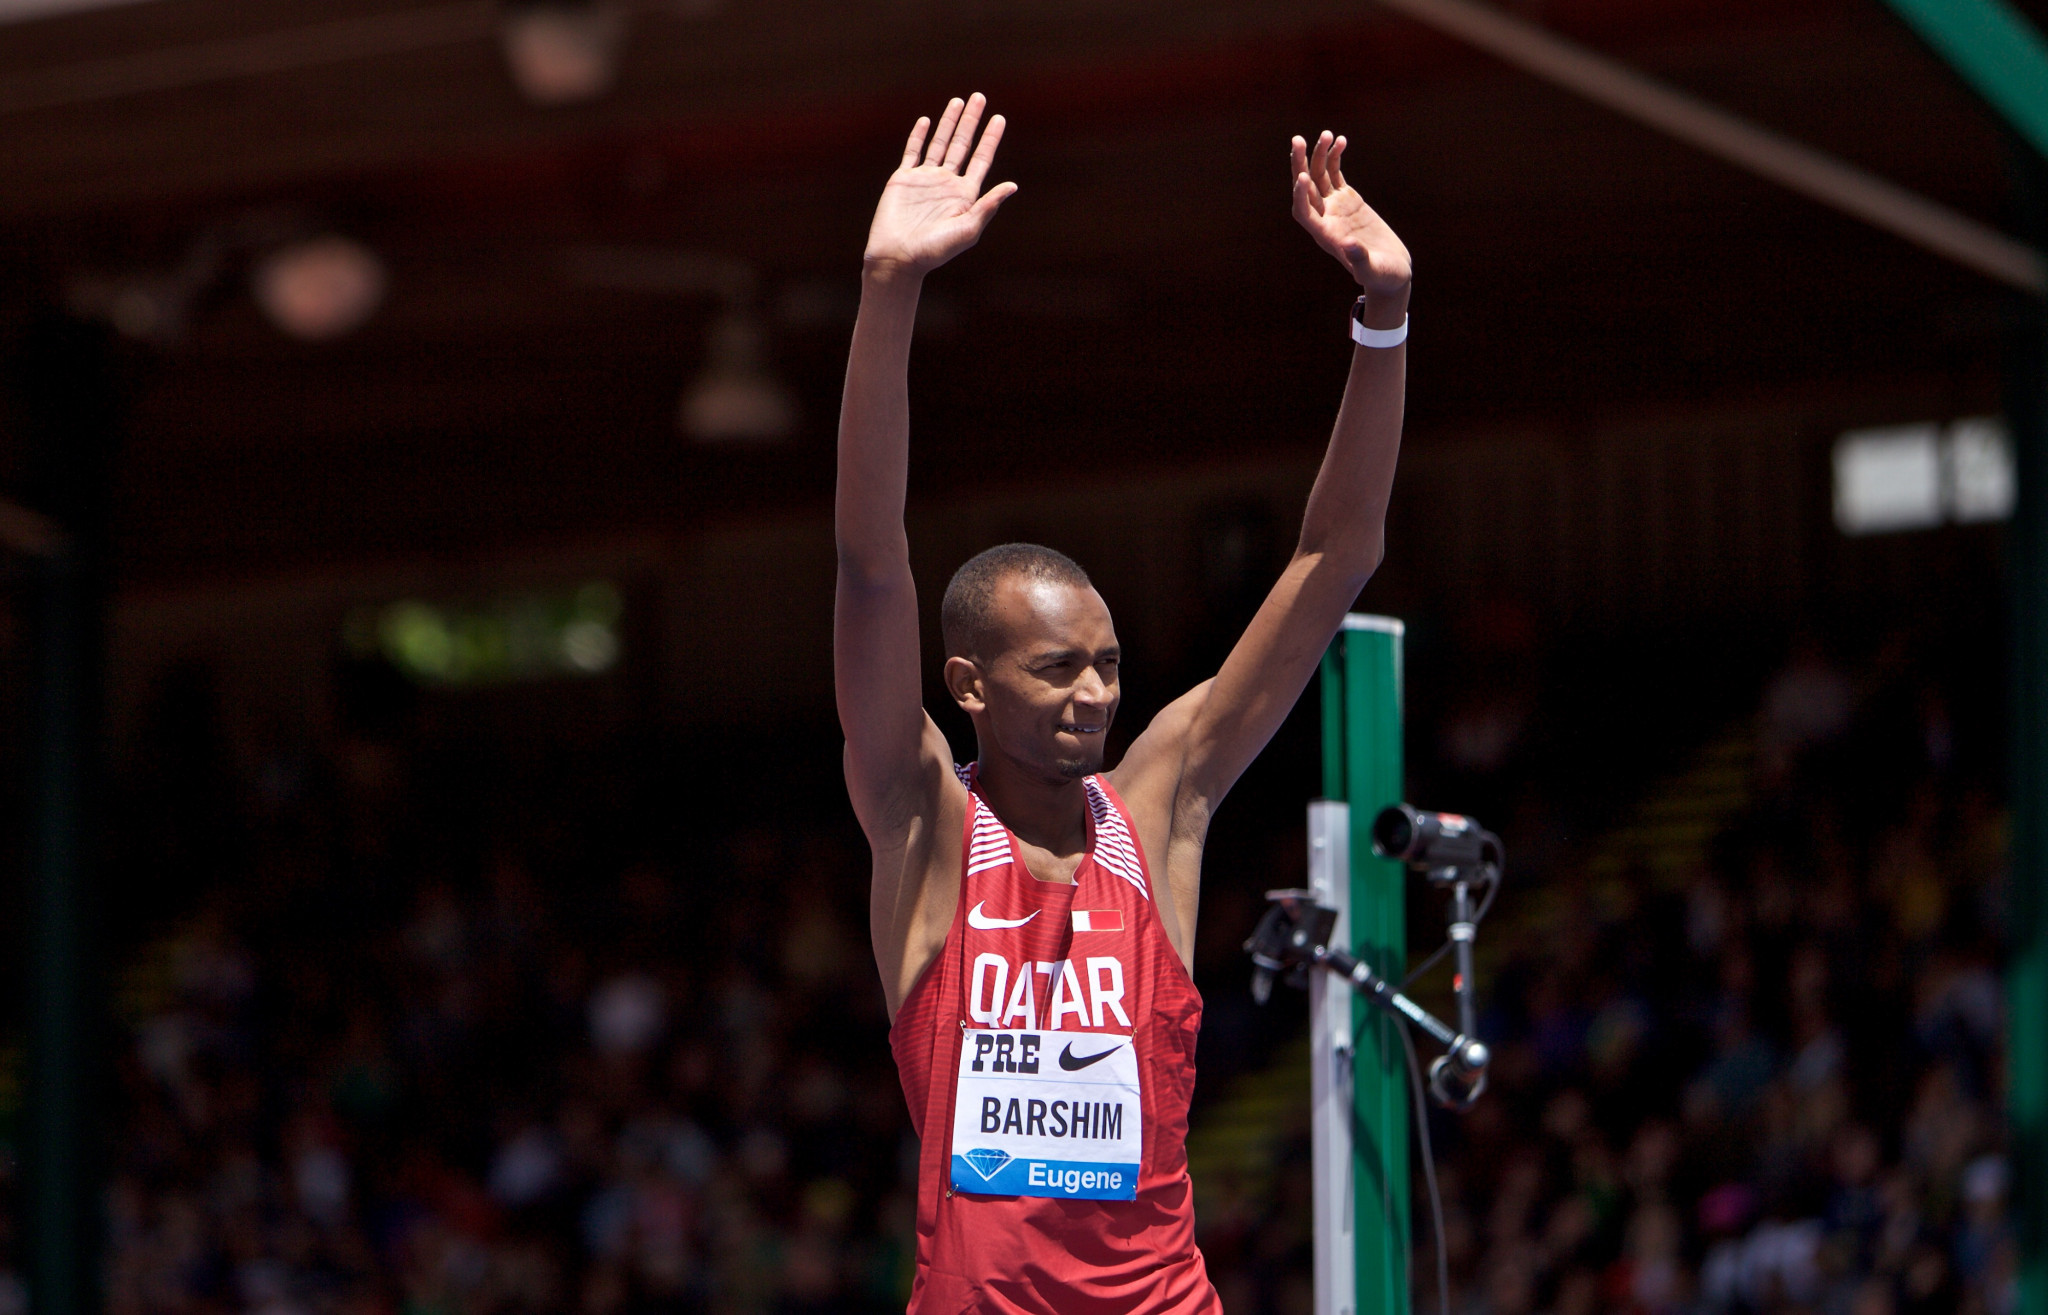 Barshim and Samba targeting home gold with 100 days to go until IAAF World Championships in Doha